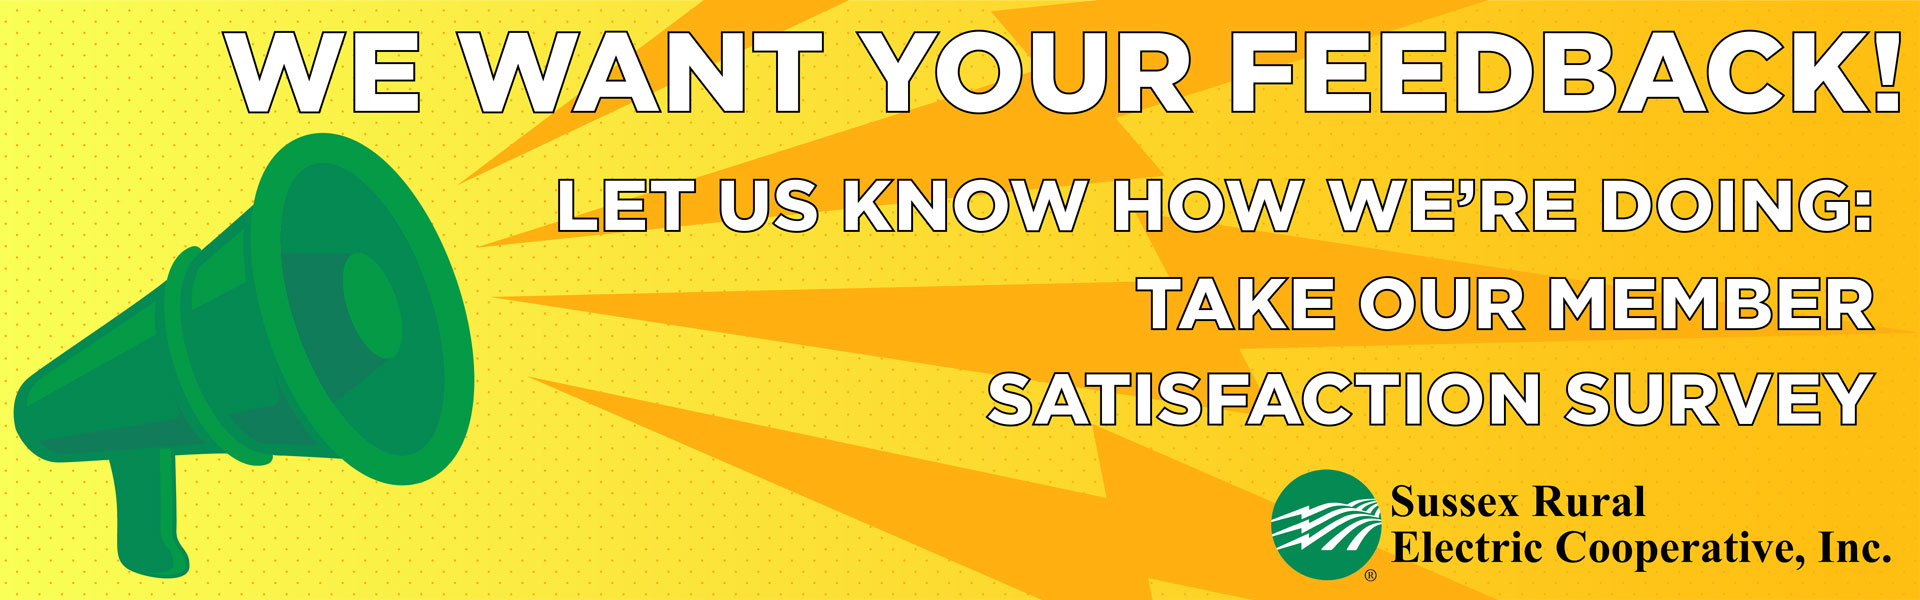 WE WANT YOUR FEEDBACK! Let us know how we're doing: take our member satisfaction survey